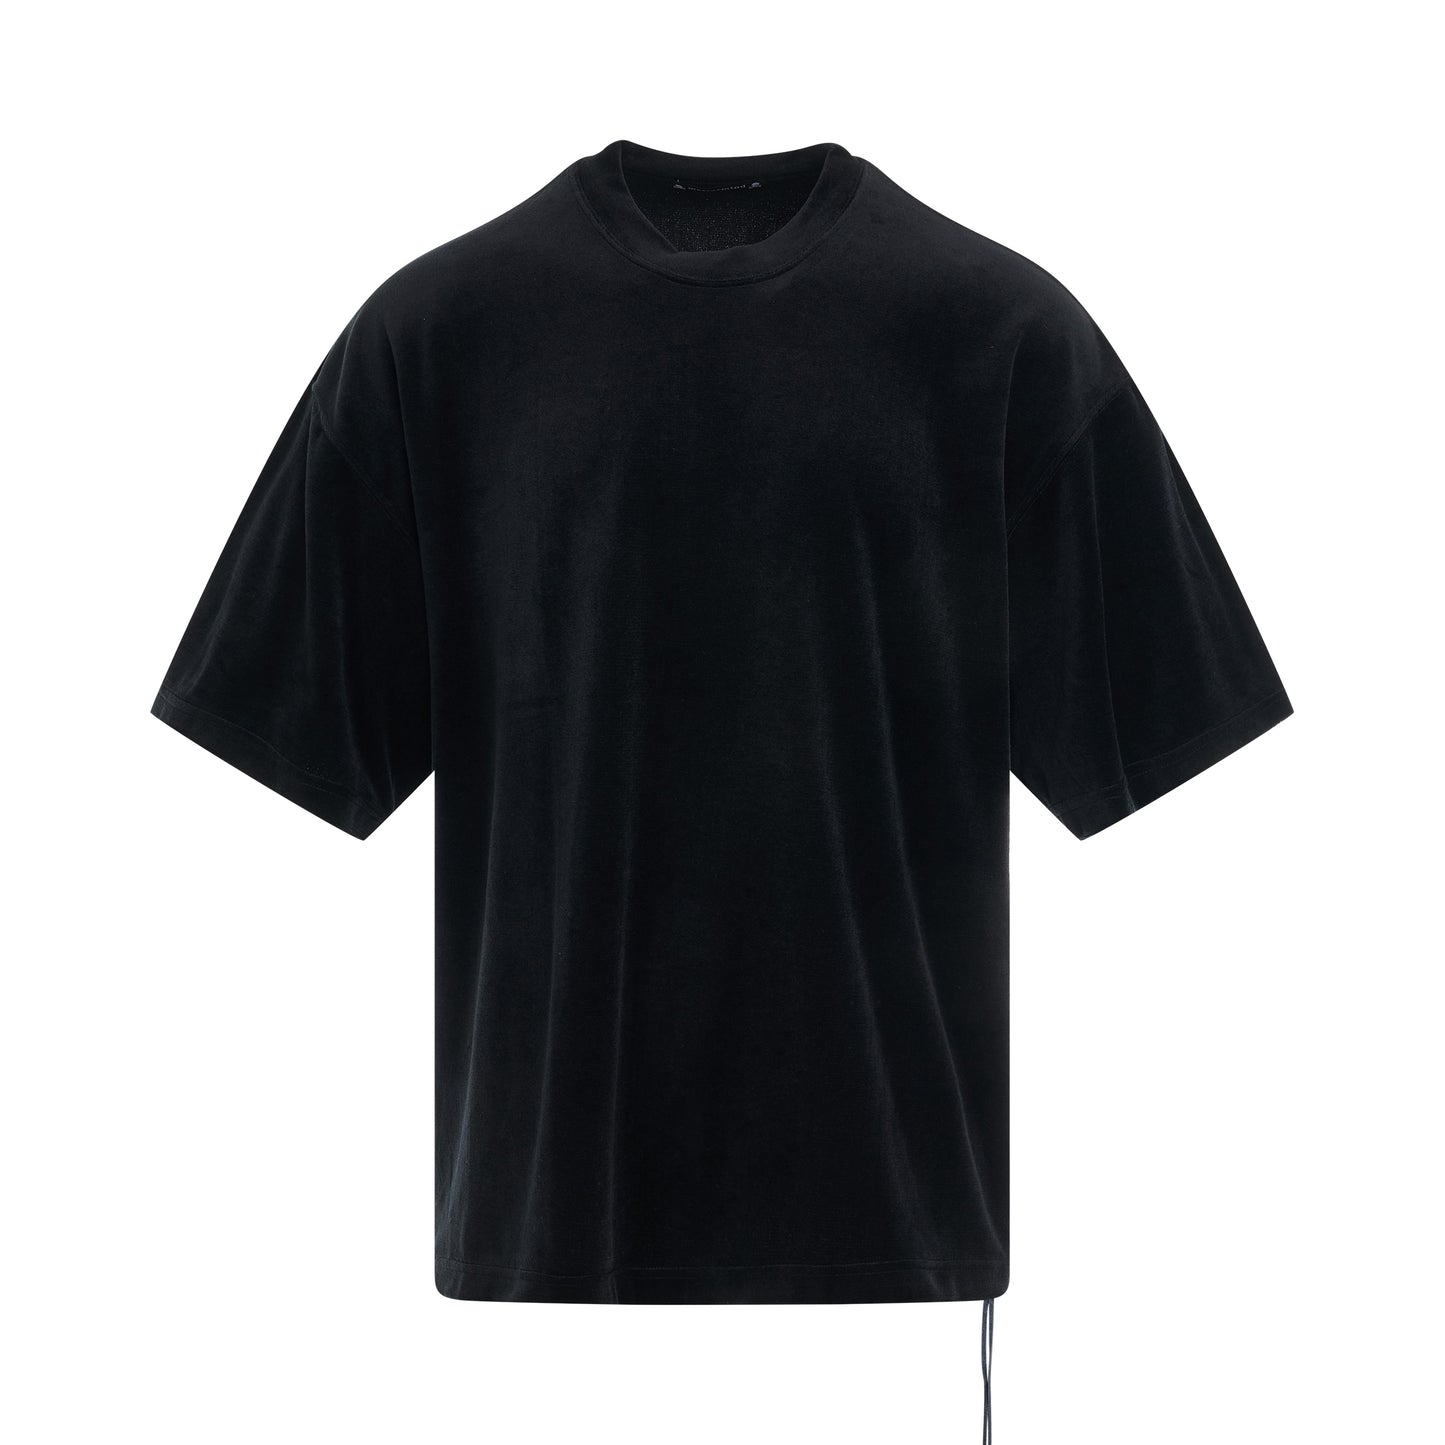 Velour Boxy Fit T-Shirt in Black